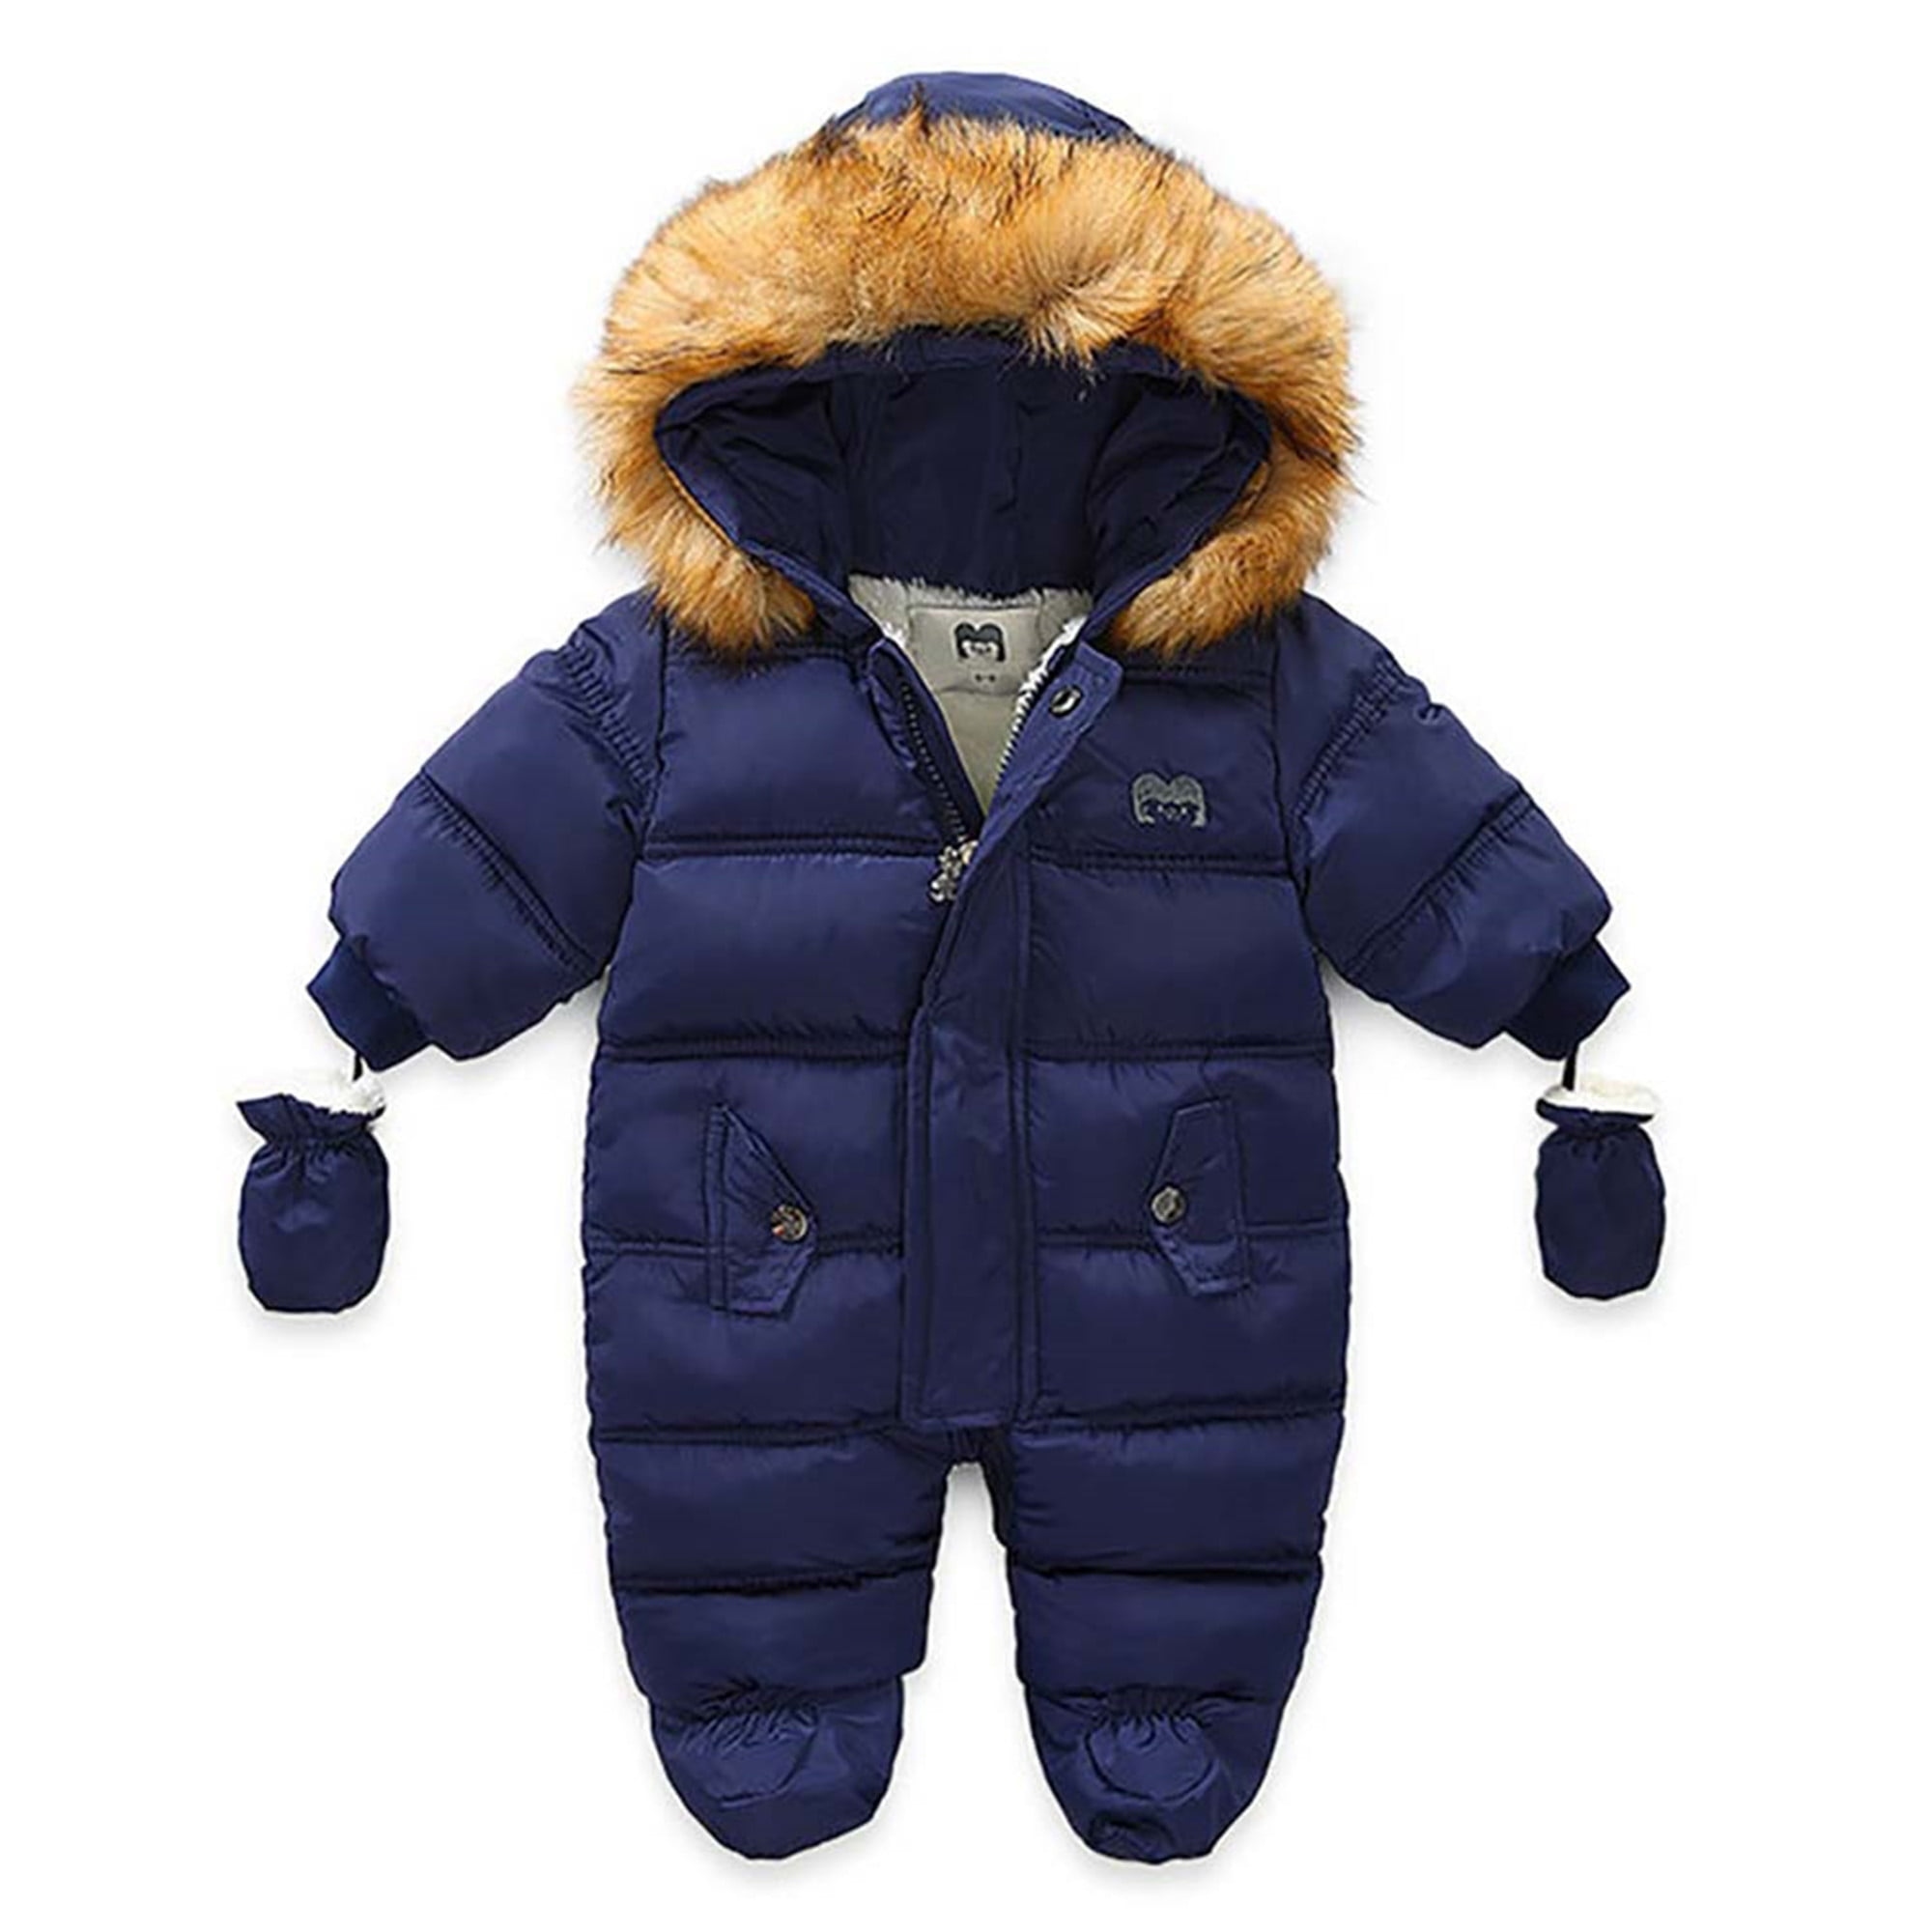 Toddler Baby Boys Girls Kid Rompers Winter Thick Cotton Warm Clothes Jumpsuit 